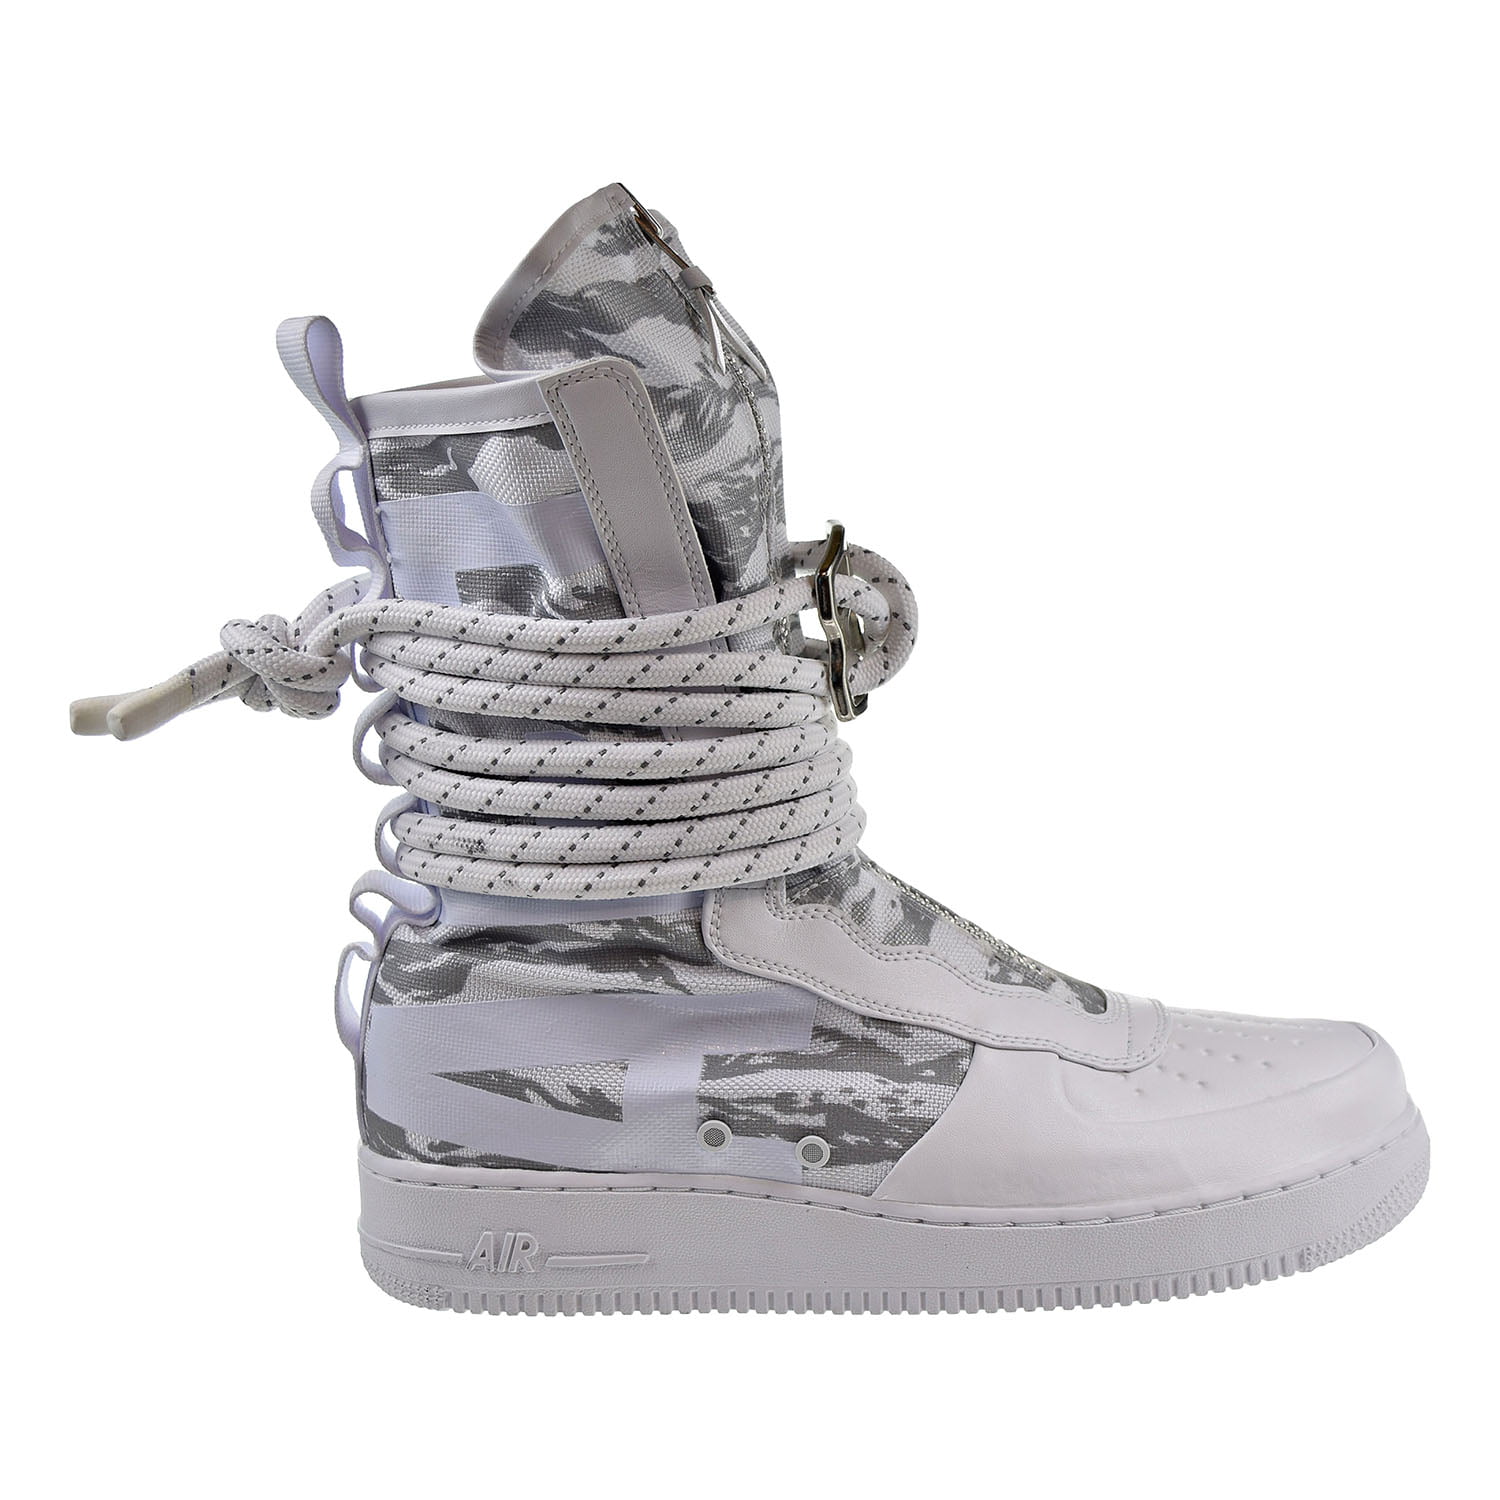 white air force 1 boots